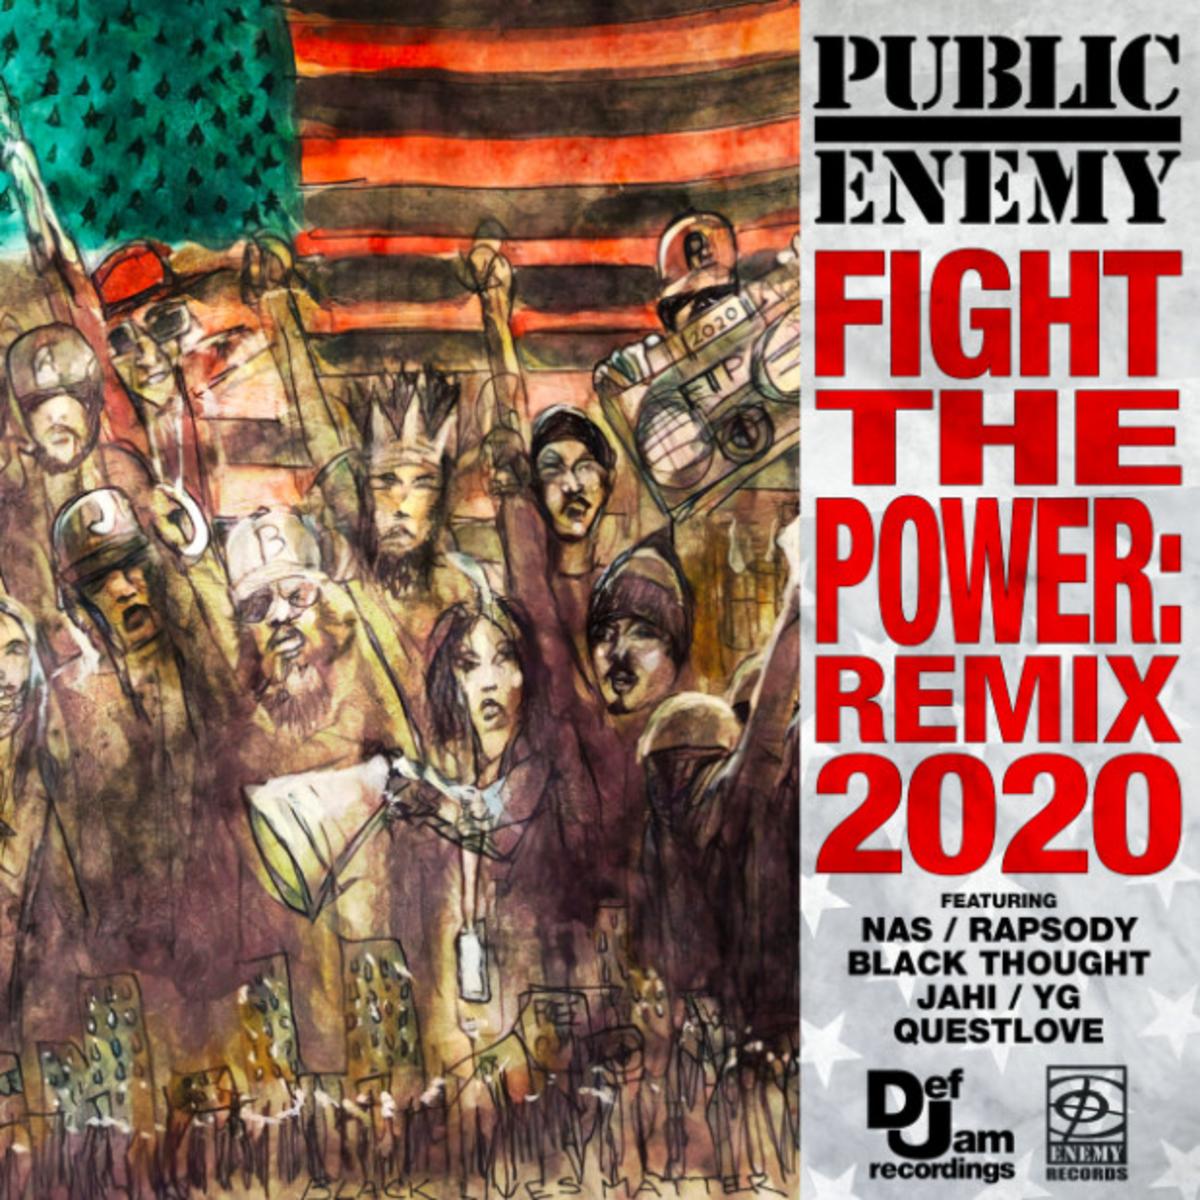 Public Enemy Releases “Fight The Power: Remix 2020” Featuring Nas, YG & More